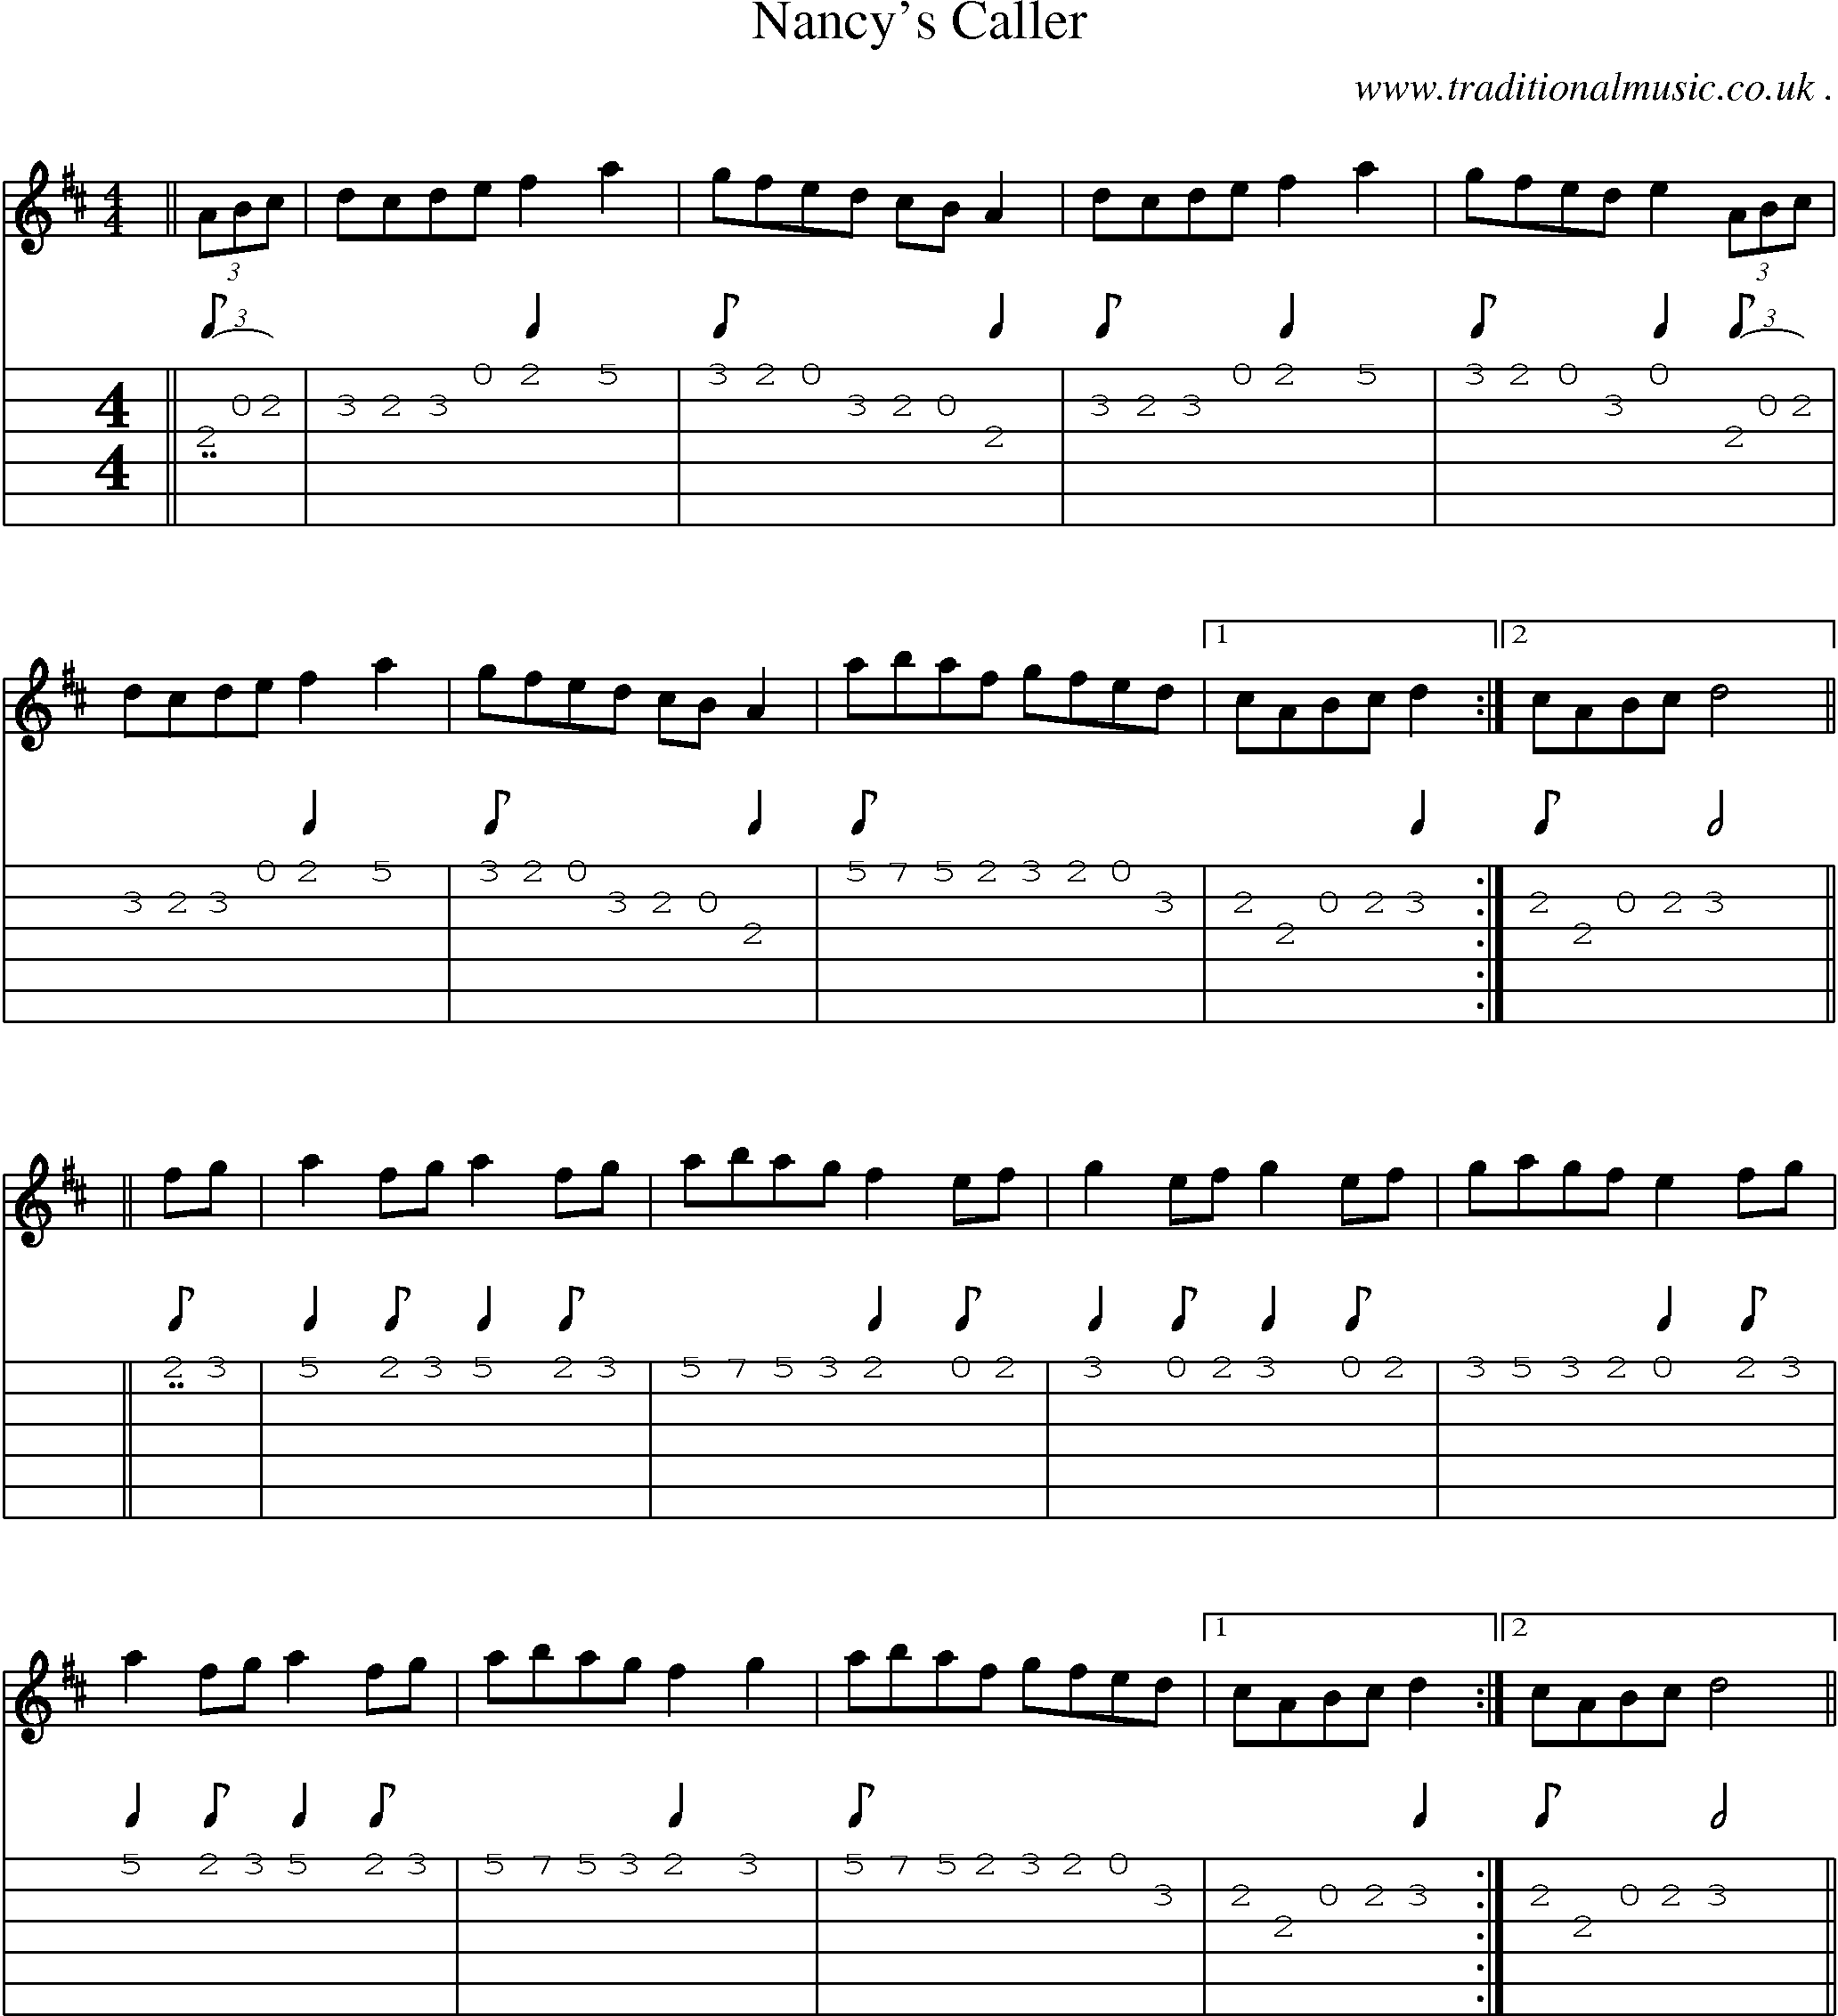 Sheet-Music and Guitar Tabs for Nancys Caller